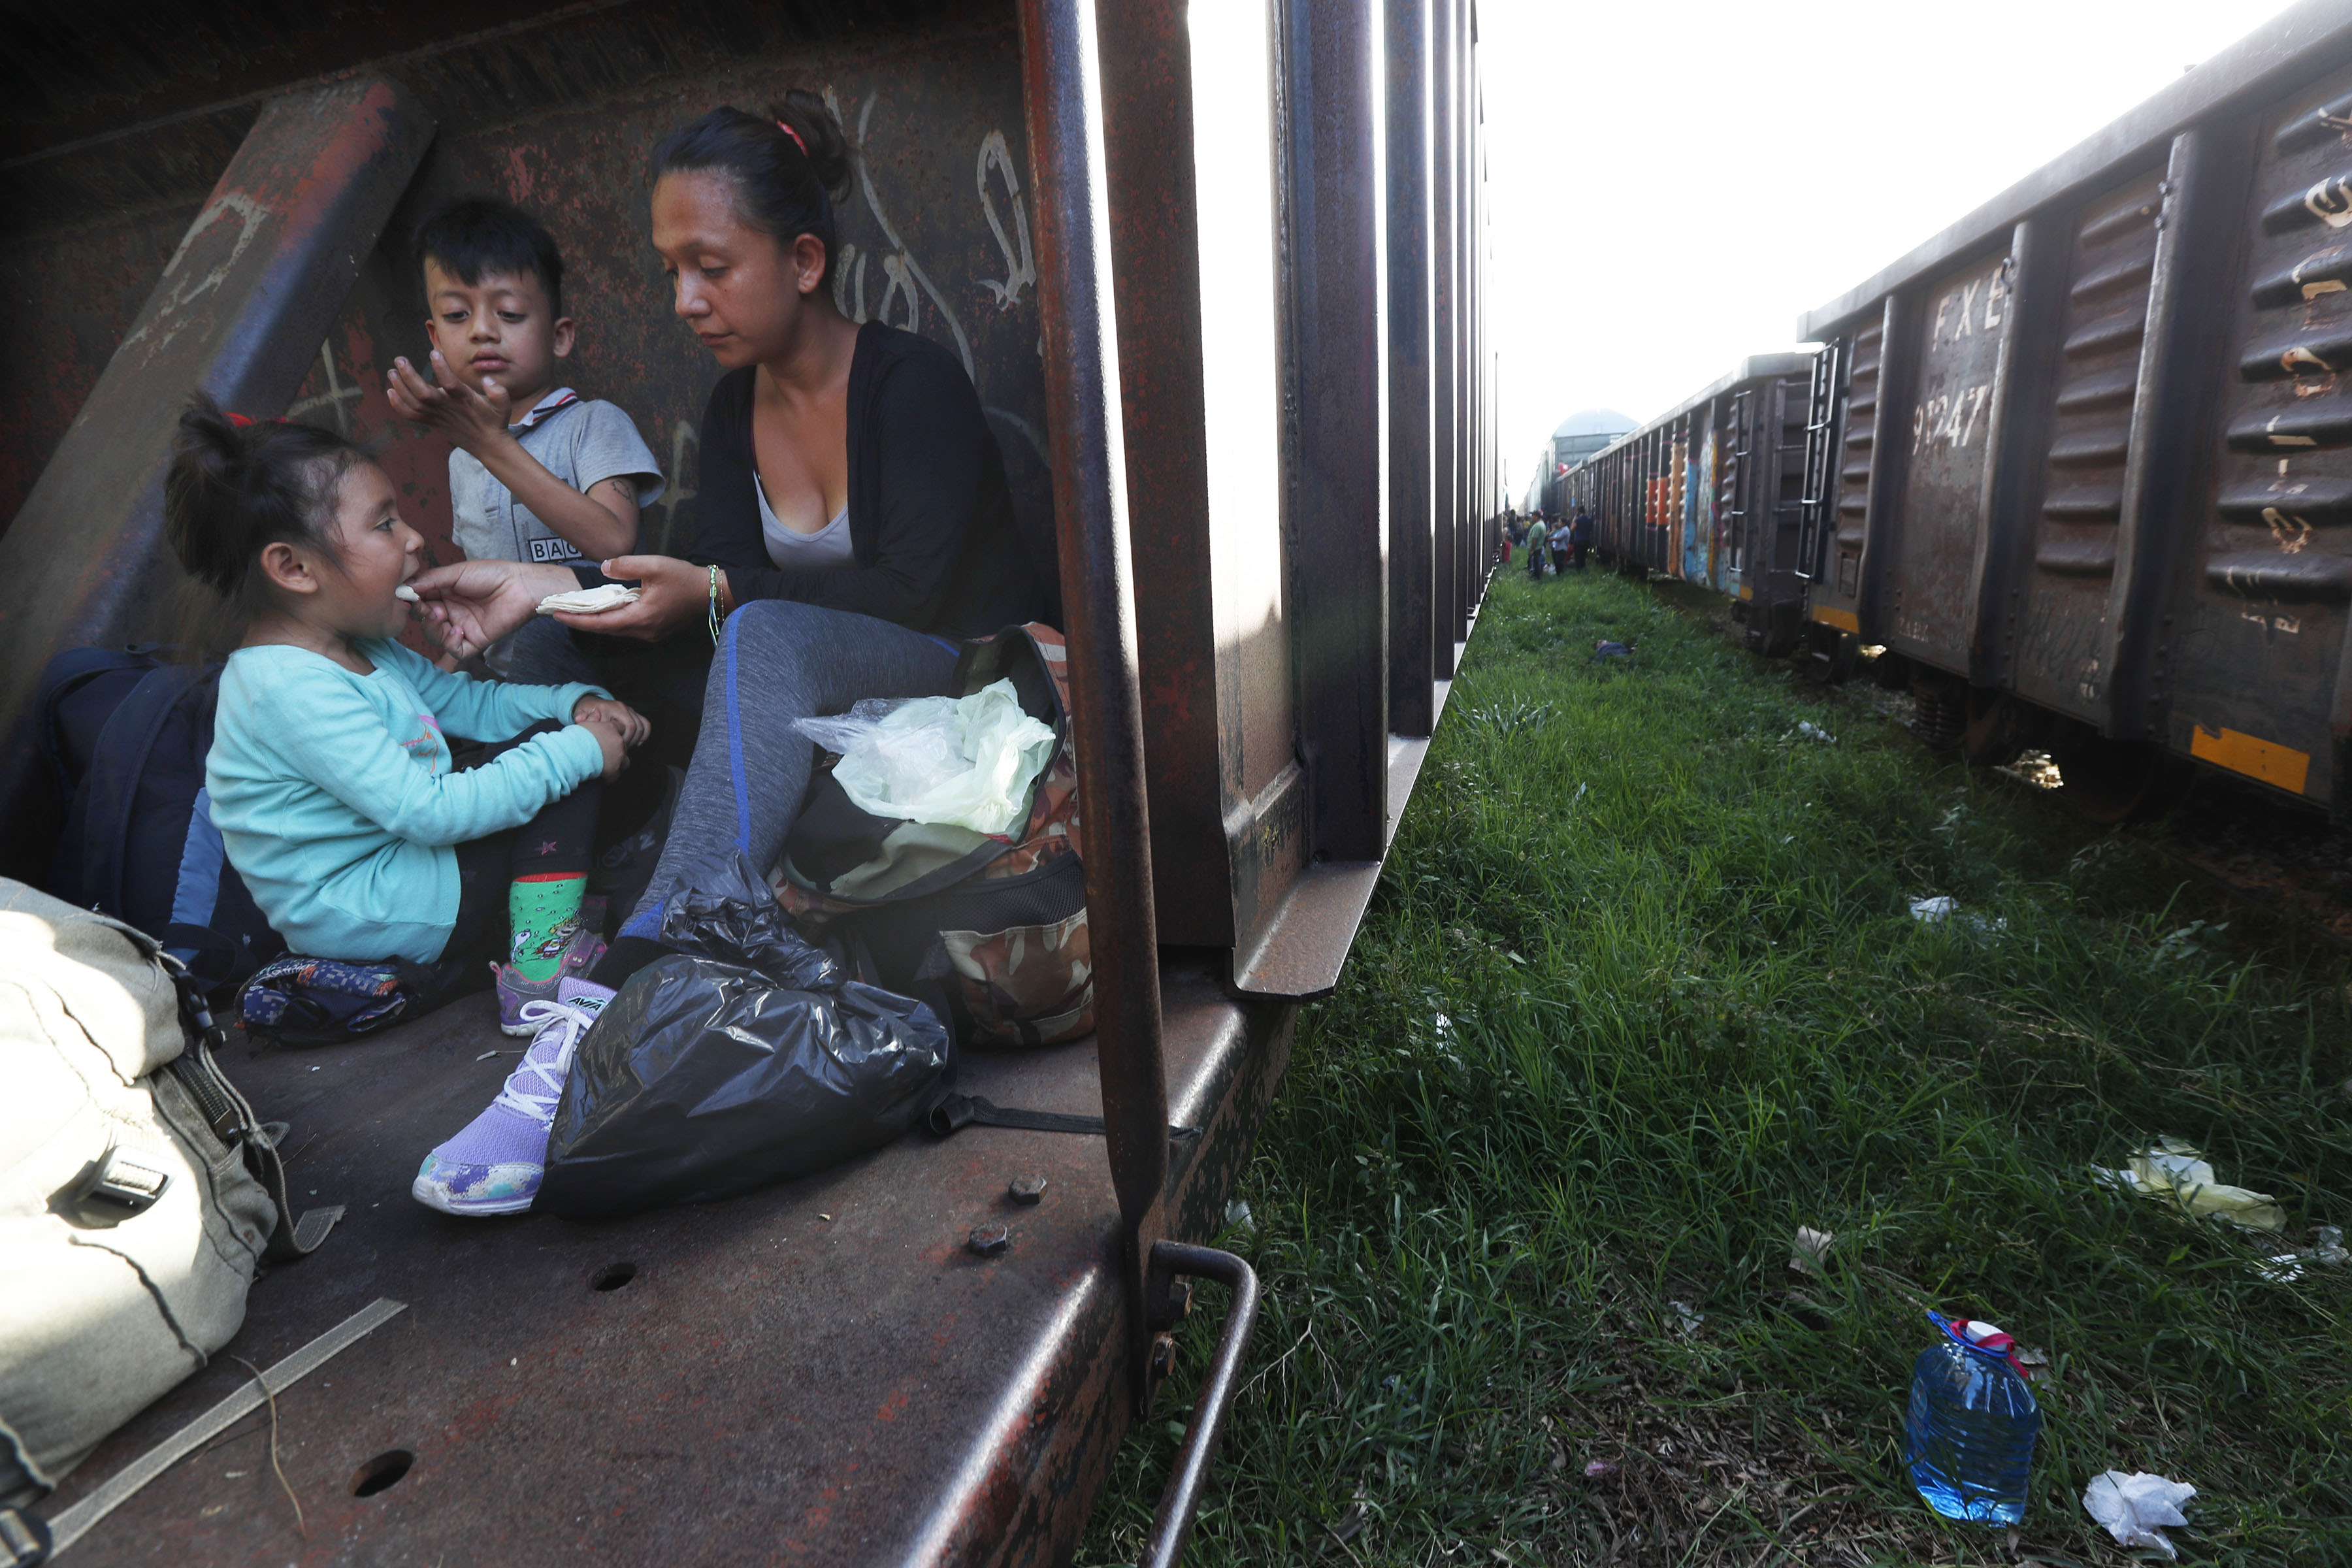 A migrant mother and children ride a freight train on their journey north, in Palenque, Chiapas state, Mexico, on June 24, 2019. The group's next stop will be Coatzacoalcos, Veracruz state. Mexico has deployed 6,500 National Guard members in the southern part of the country, plus another 15,000 soldiers along its northern border in a bid to reduce the number of migrants traveling through its territory to reach the U.S. (AP Photo/Marco Ugarte)